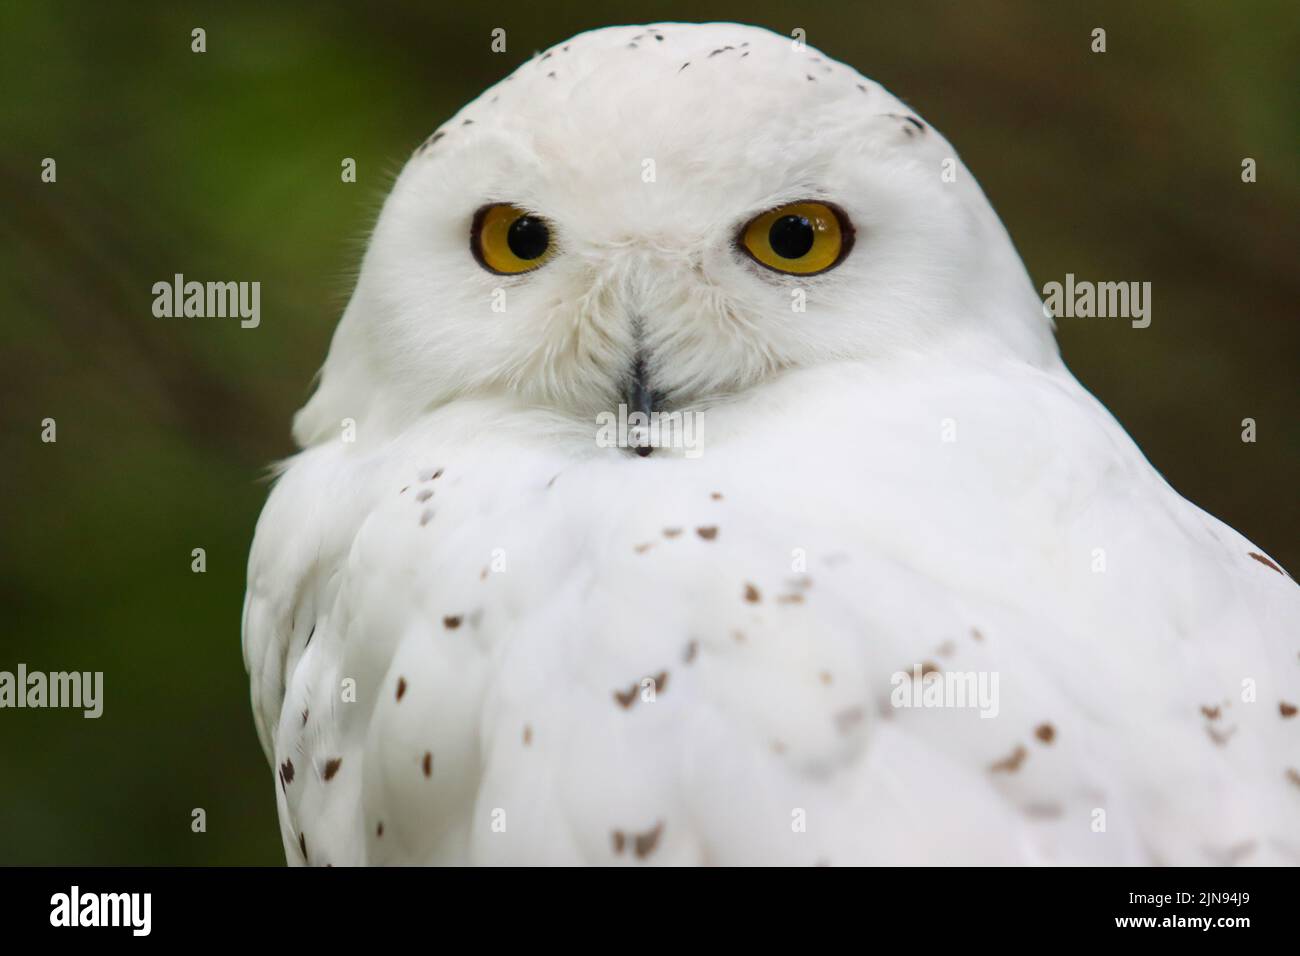 Snow owl look at me Stock Photo